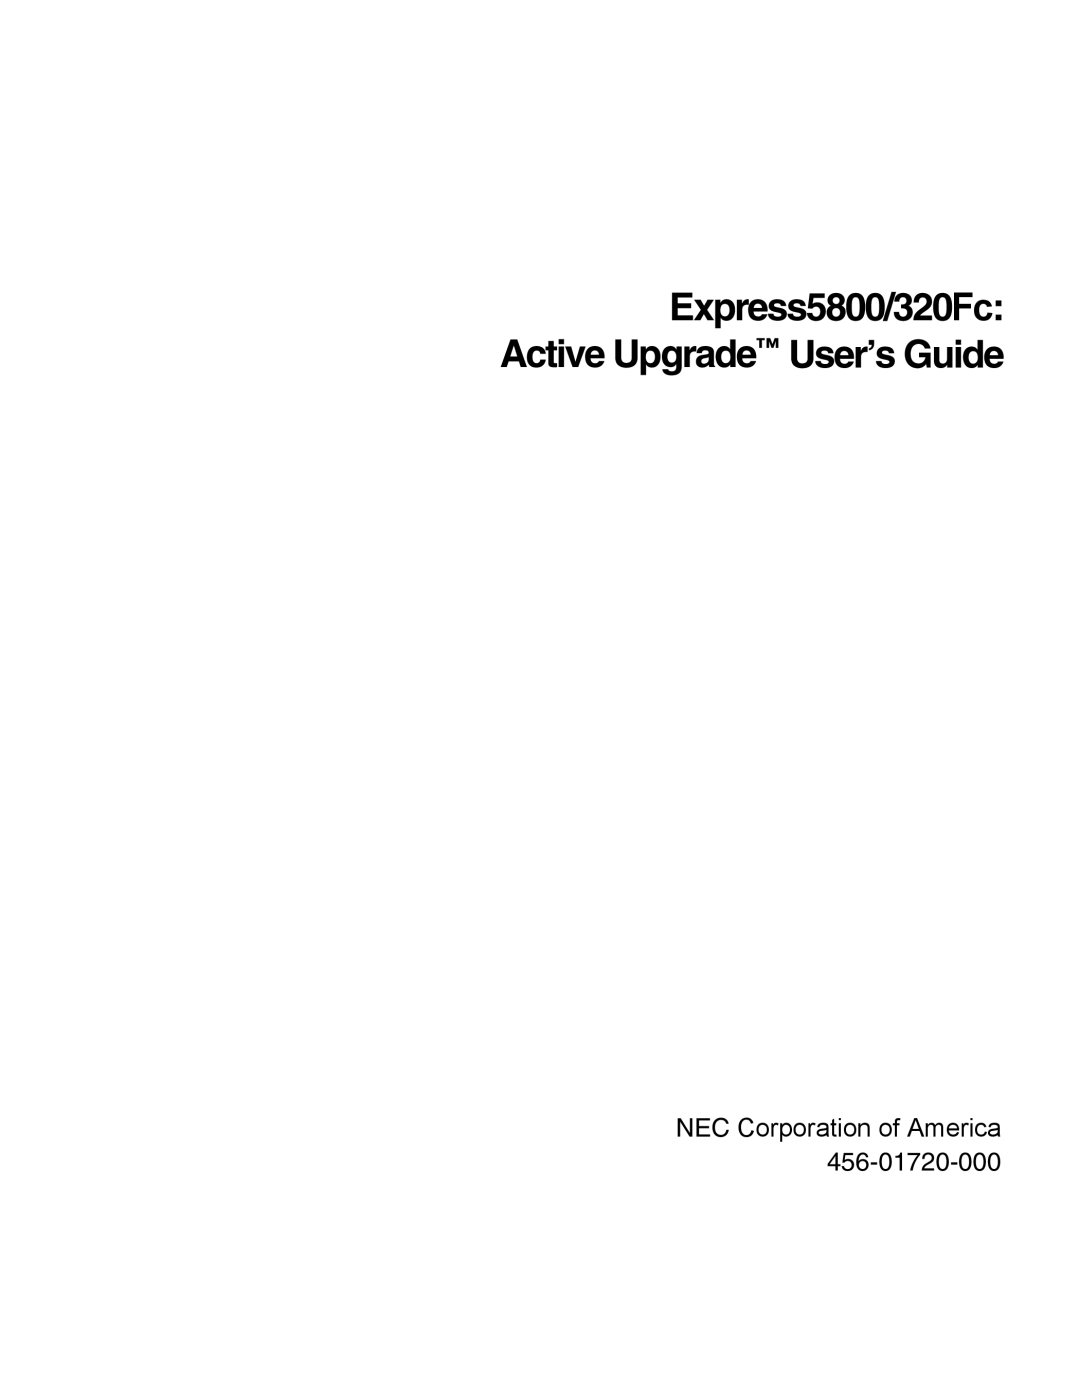 NEC manual Express5800/320Fc Active Upgrade User’s Guide 